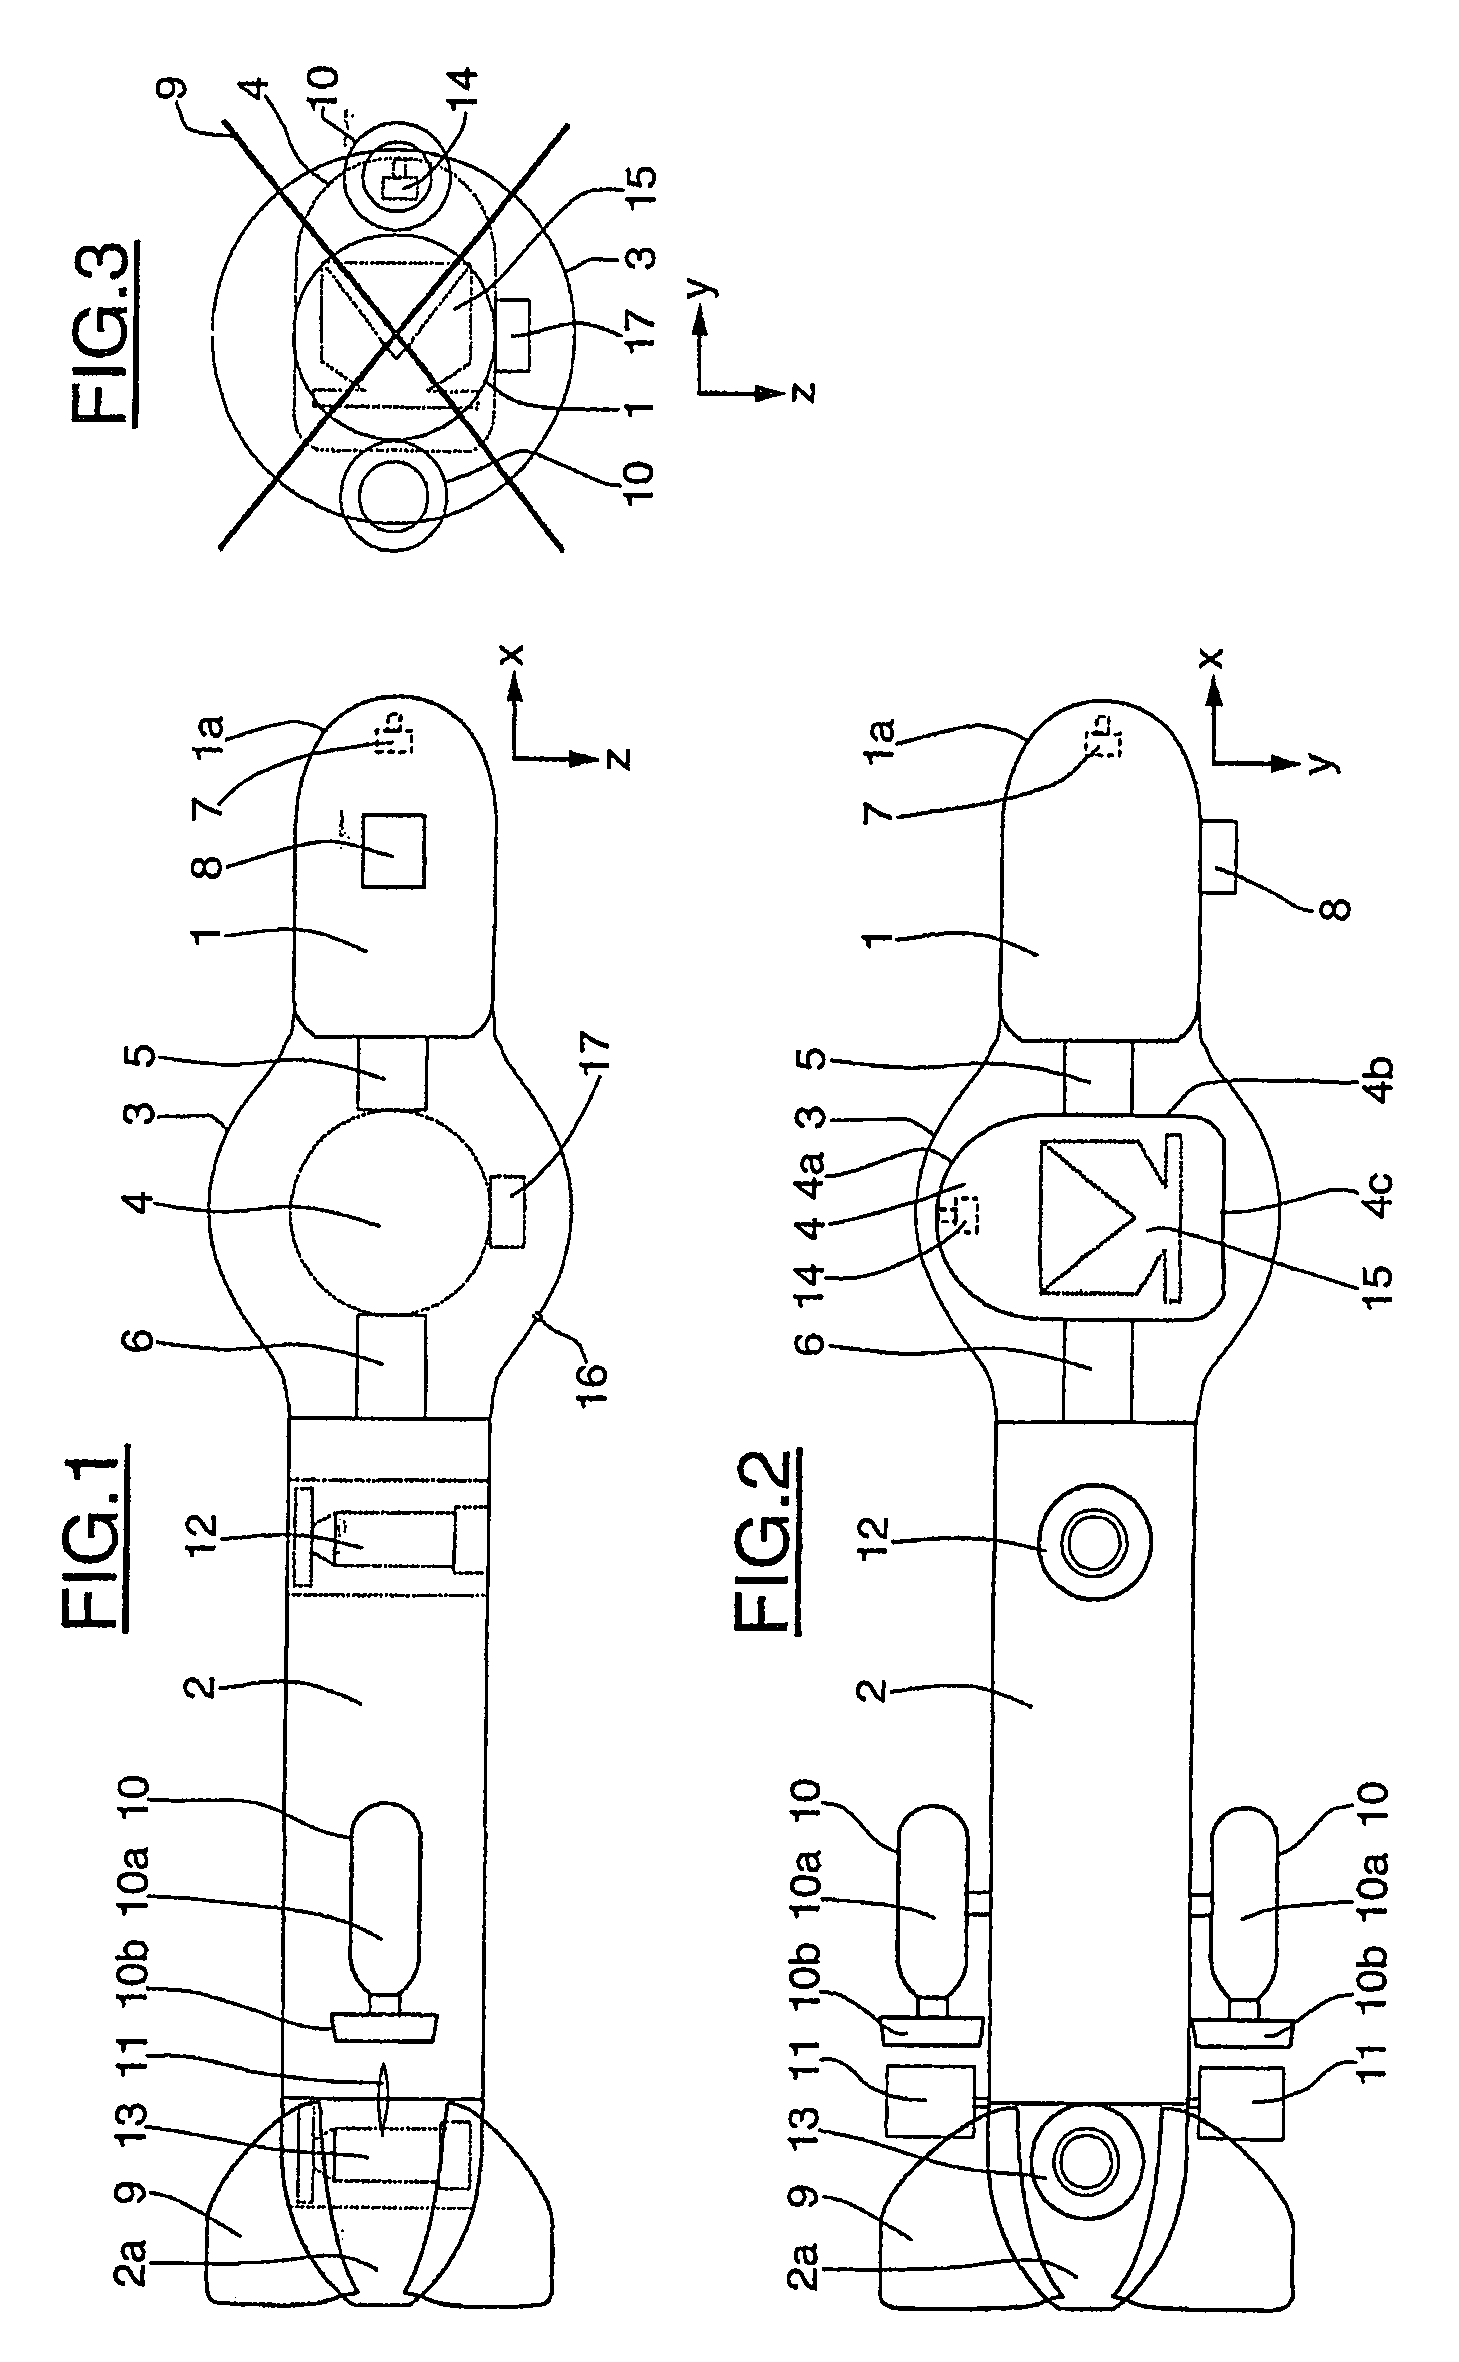 Device for destroying subsea or floating objects